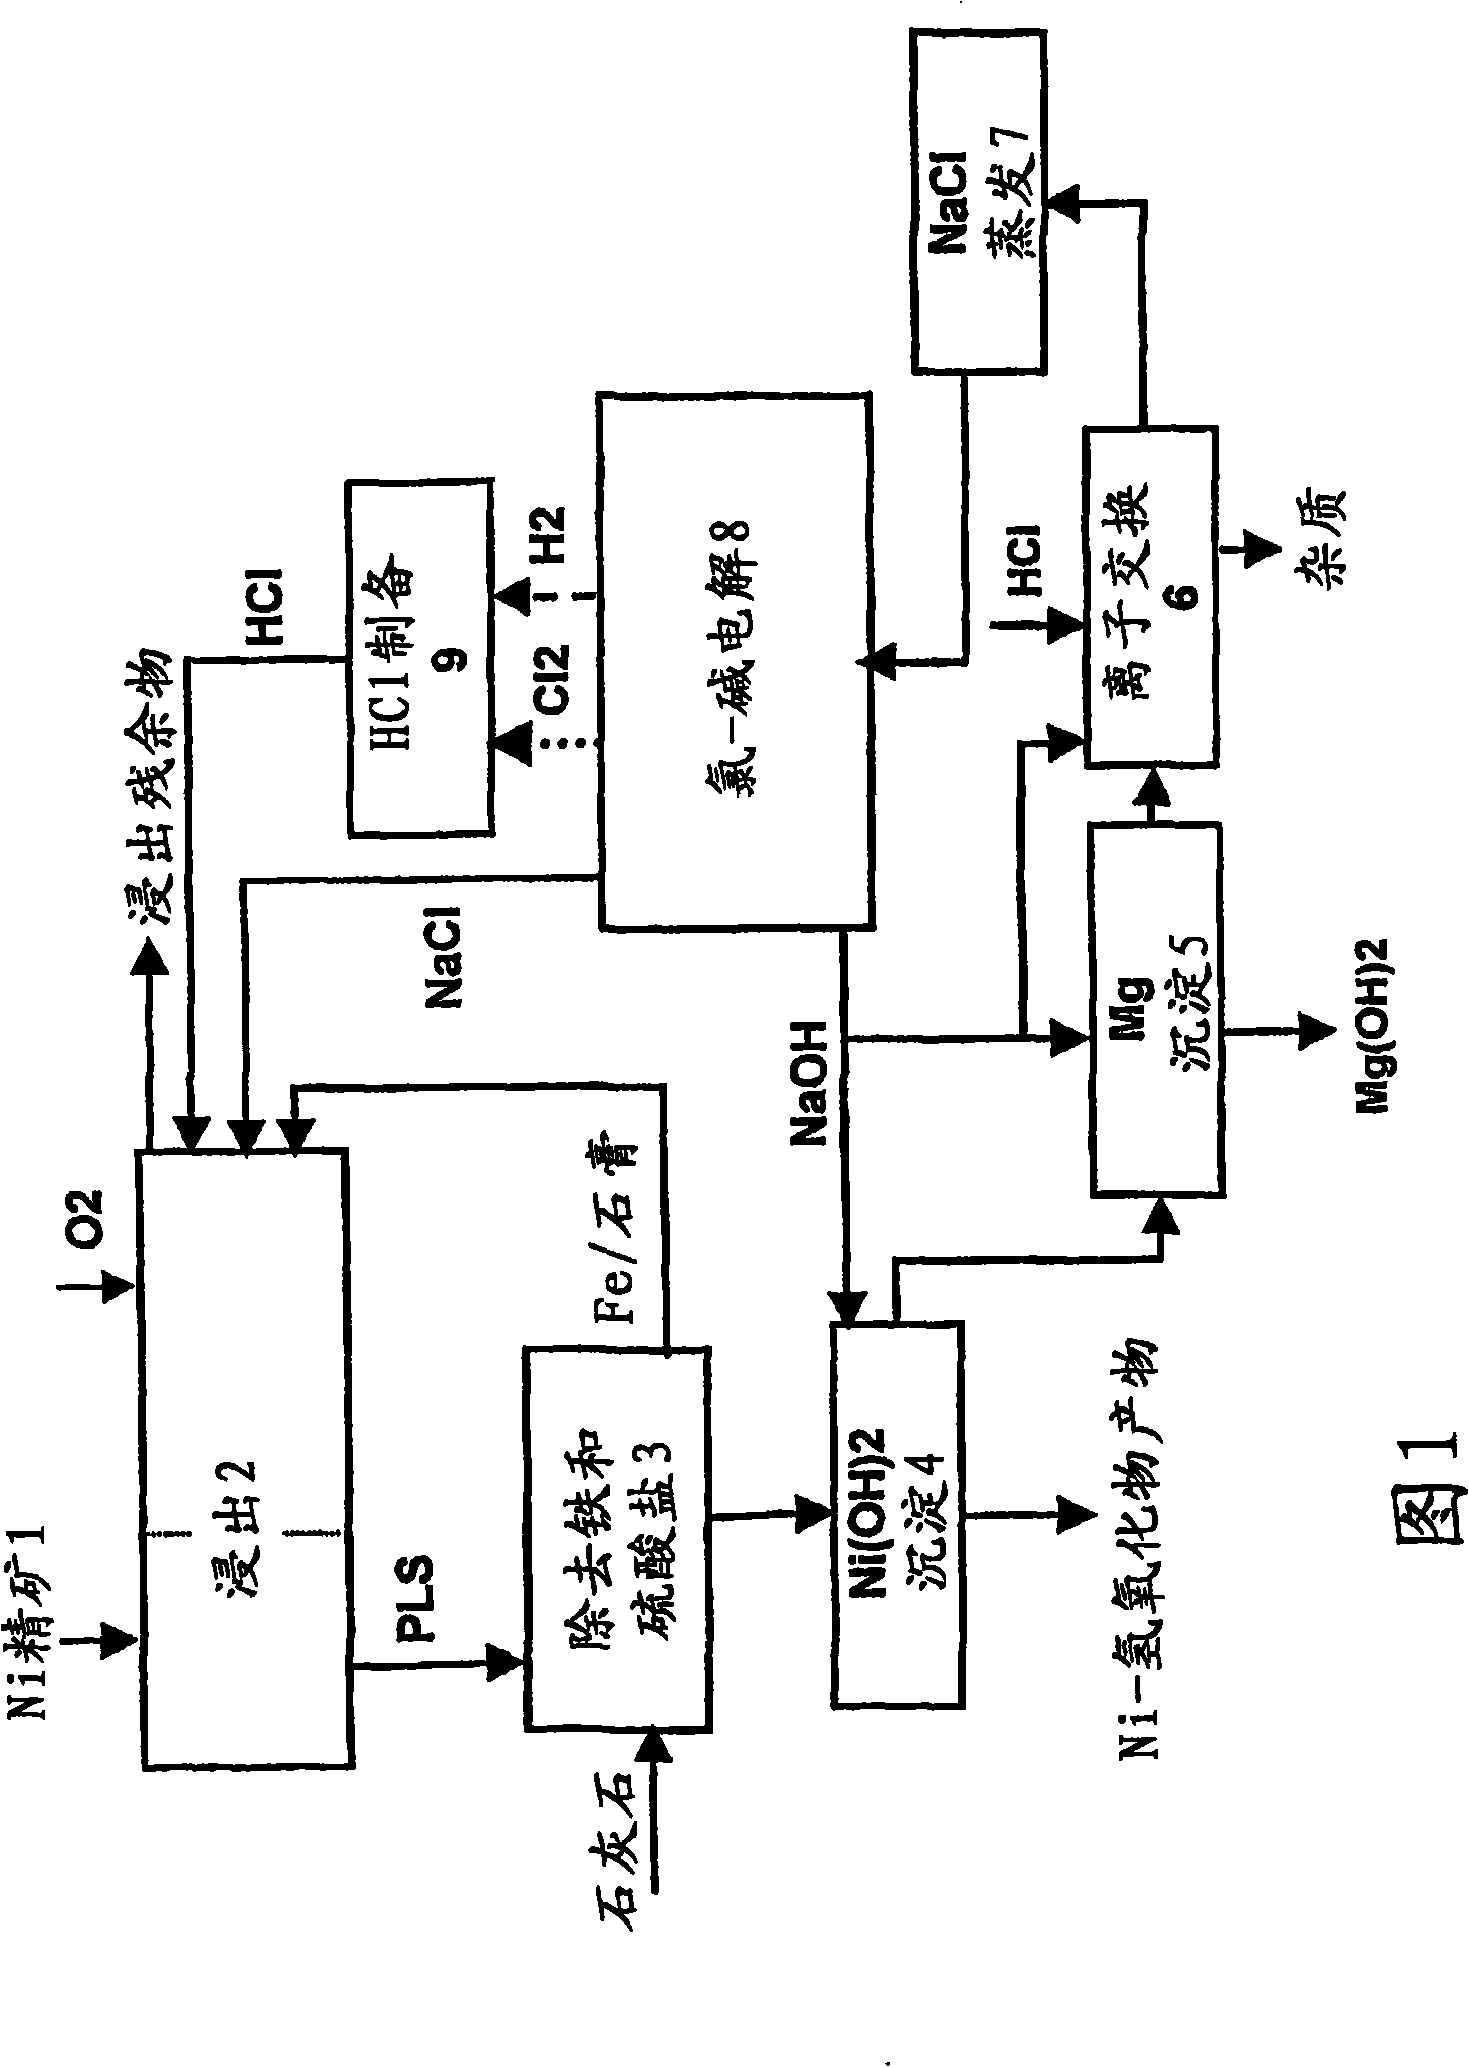 Method for processing nickel bearing raw material in chloride-based leaching